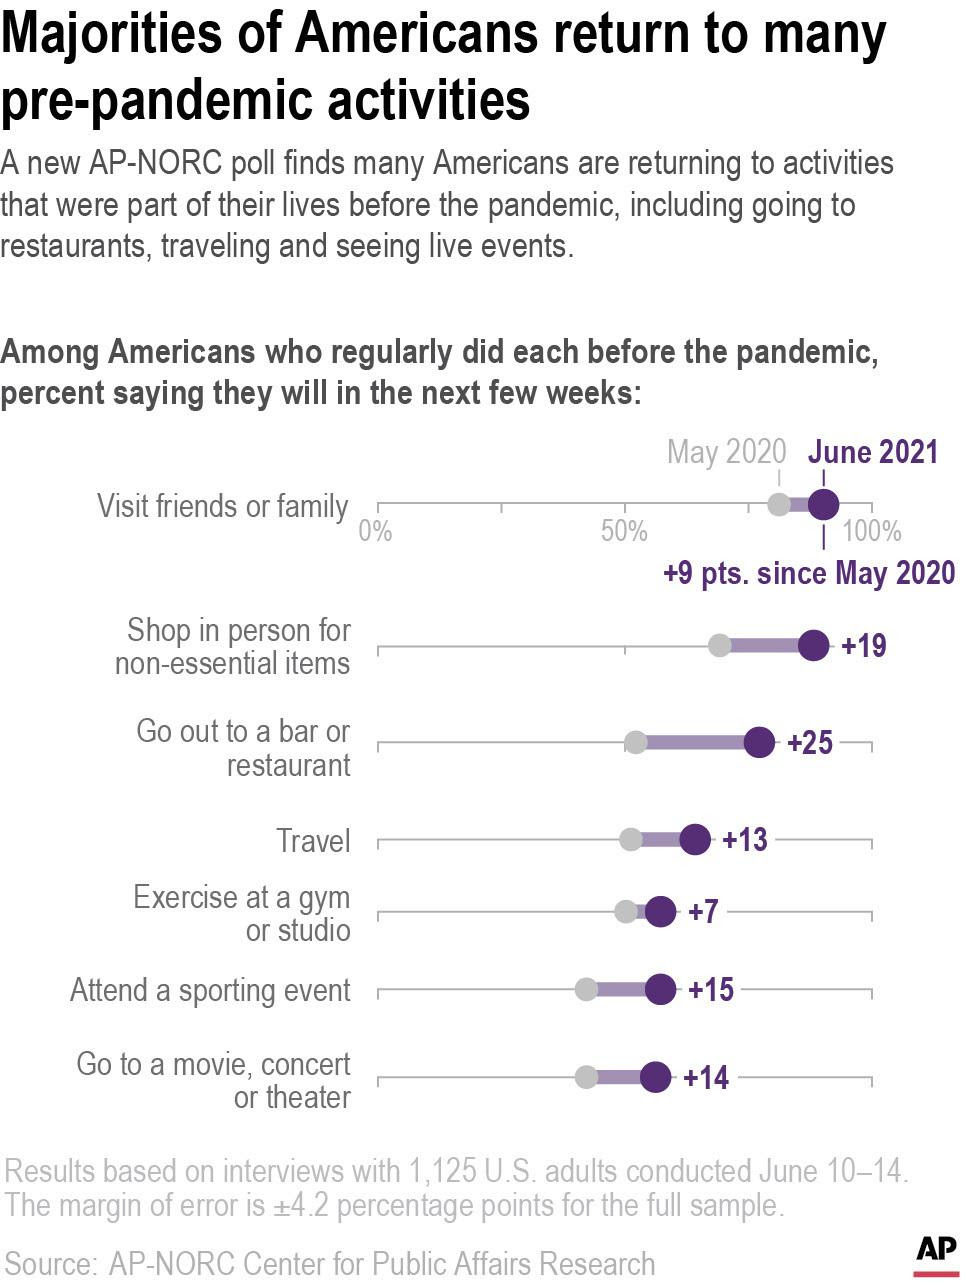 A new AP-NORC poll finds Americans are more likely now than they were in May 2020 to return to activities they were doing regularly before the pandemic, including going to restaurants, traveling and seeing live events.